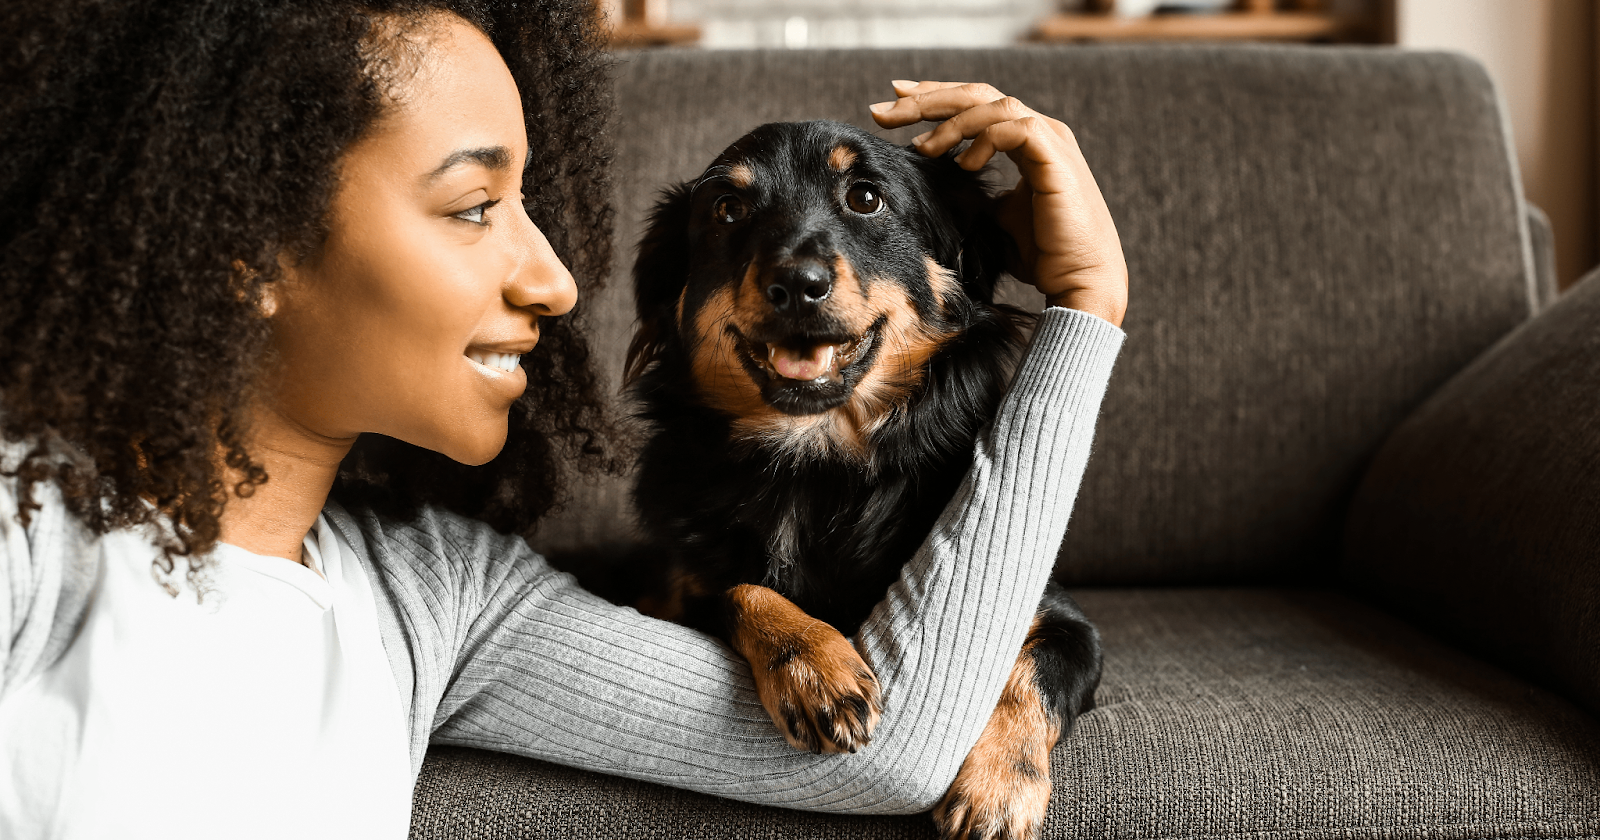 Woman smiling at small dog laying on couch